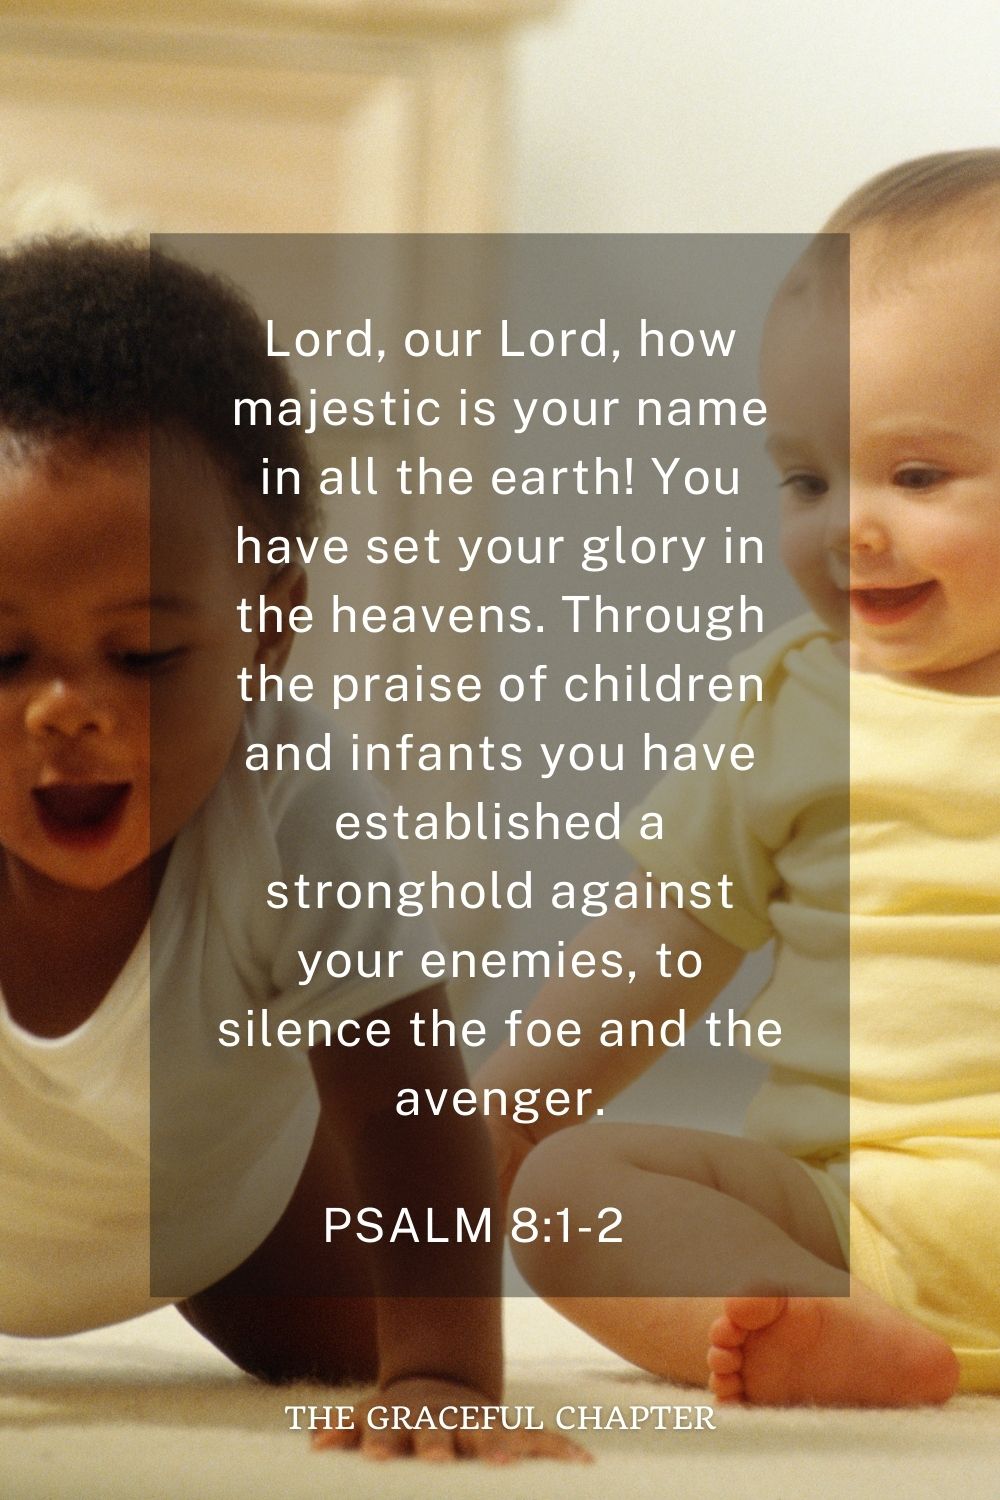 Lord, our Lord, how majestic is your name in all the earth! You have set your glory in the heavens. Through the praise of children and infants you have established a stronghold against your enemies, to silence the foe and the avenger. Psalm 8:1-2